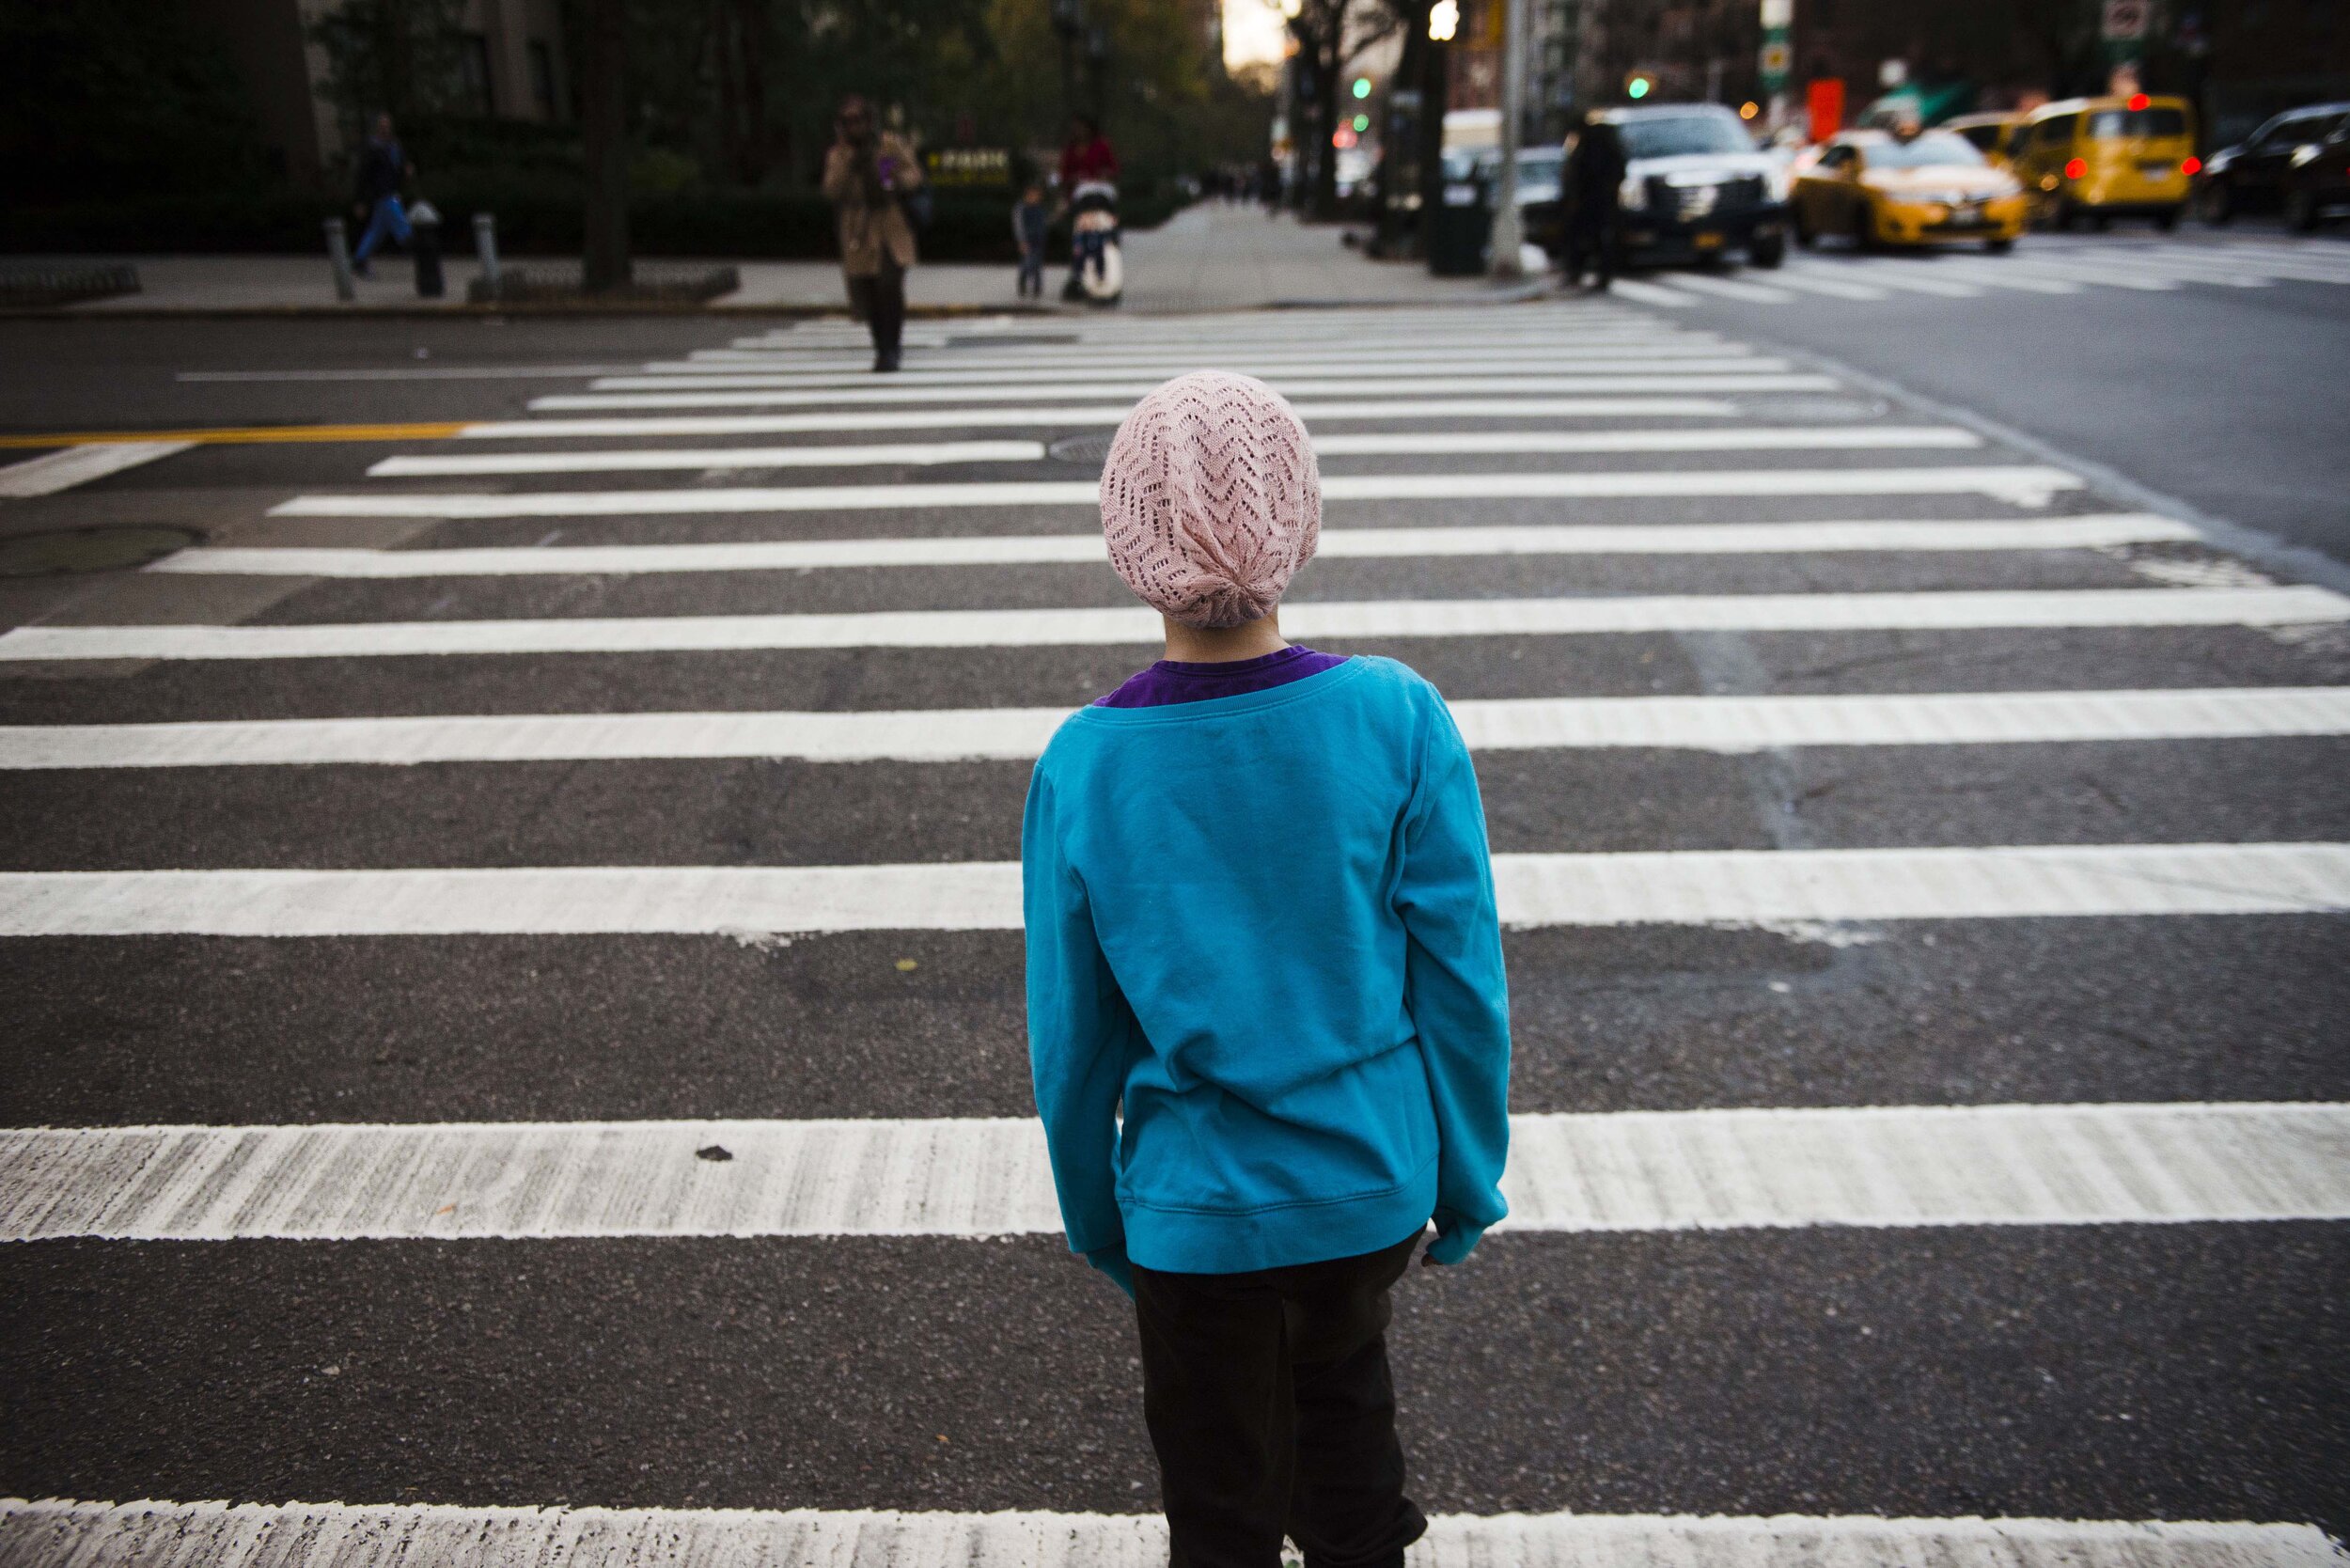  Peyton Walton, 10, pauses at a cross walk in between running down the street following her radiation treatment at the Memorial Sloan Kettering Cancer Center on Monday, November 16, 2015 in New York City, NY. Peyton's mother Lynn Schaeber said Peyton